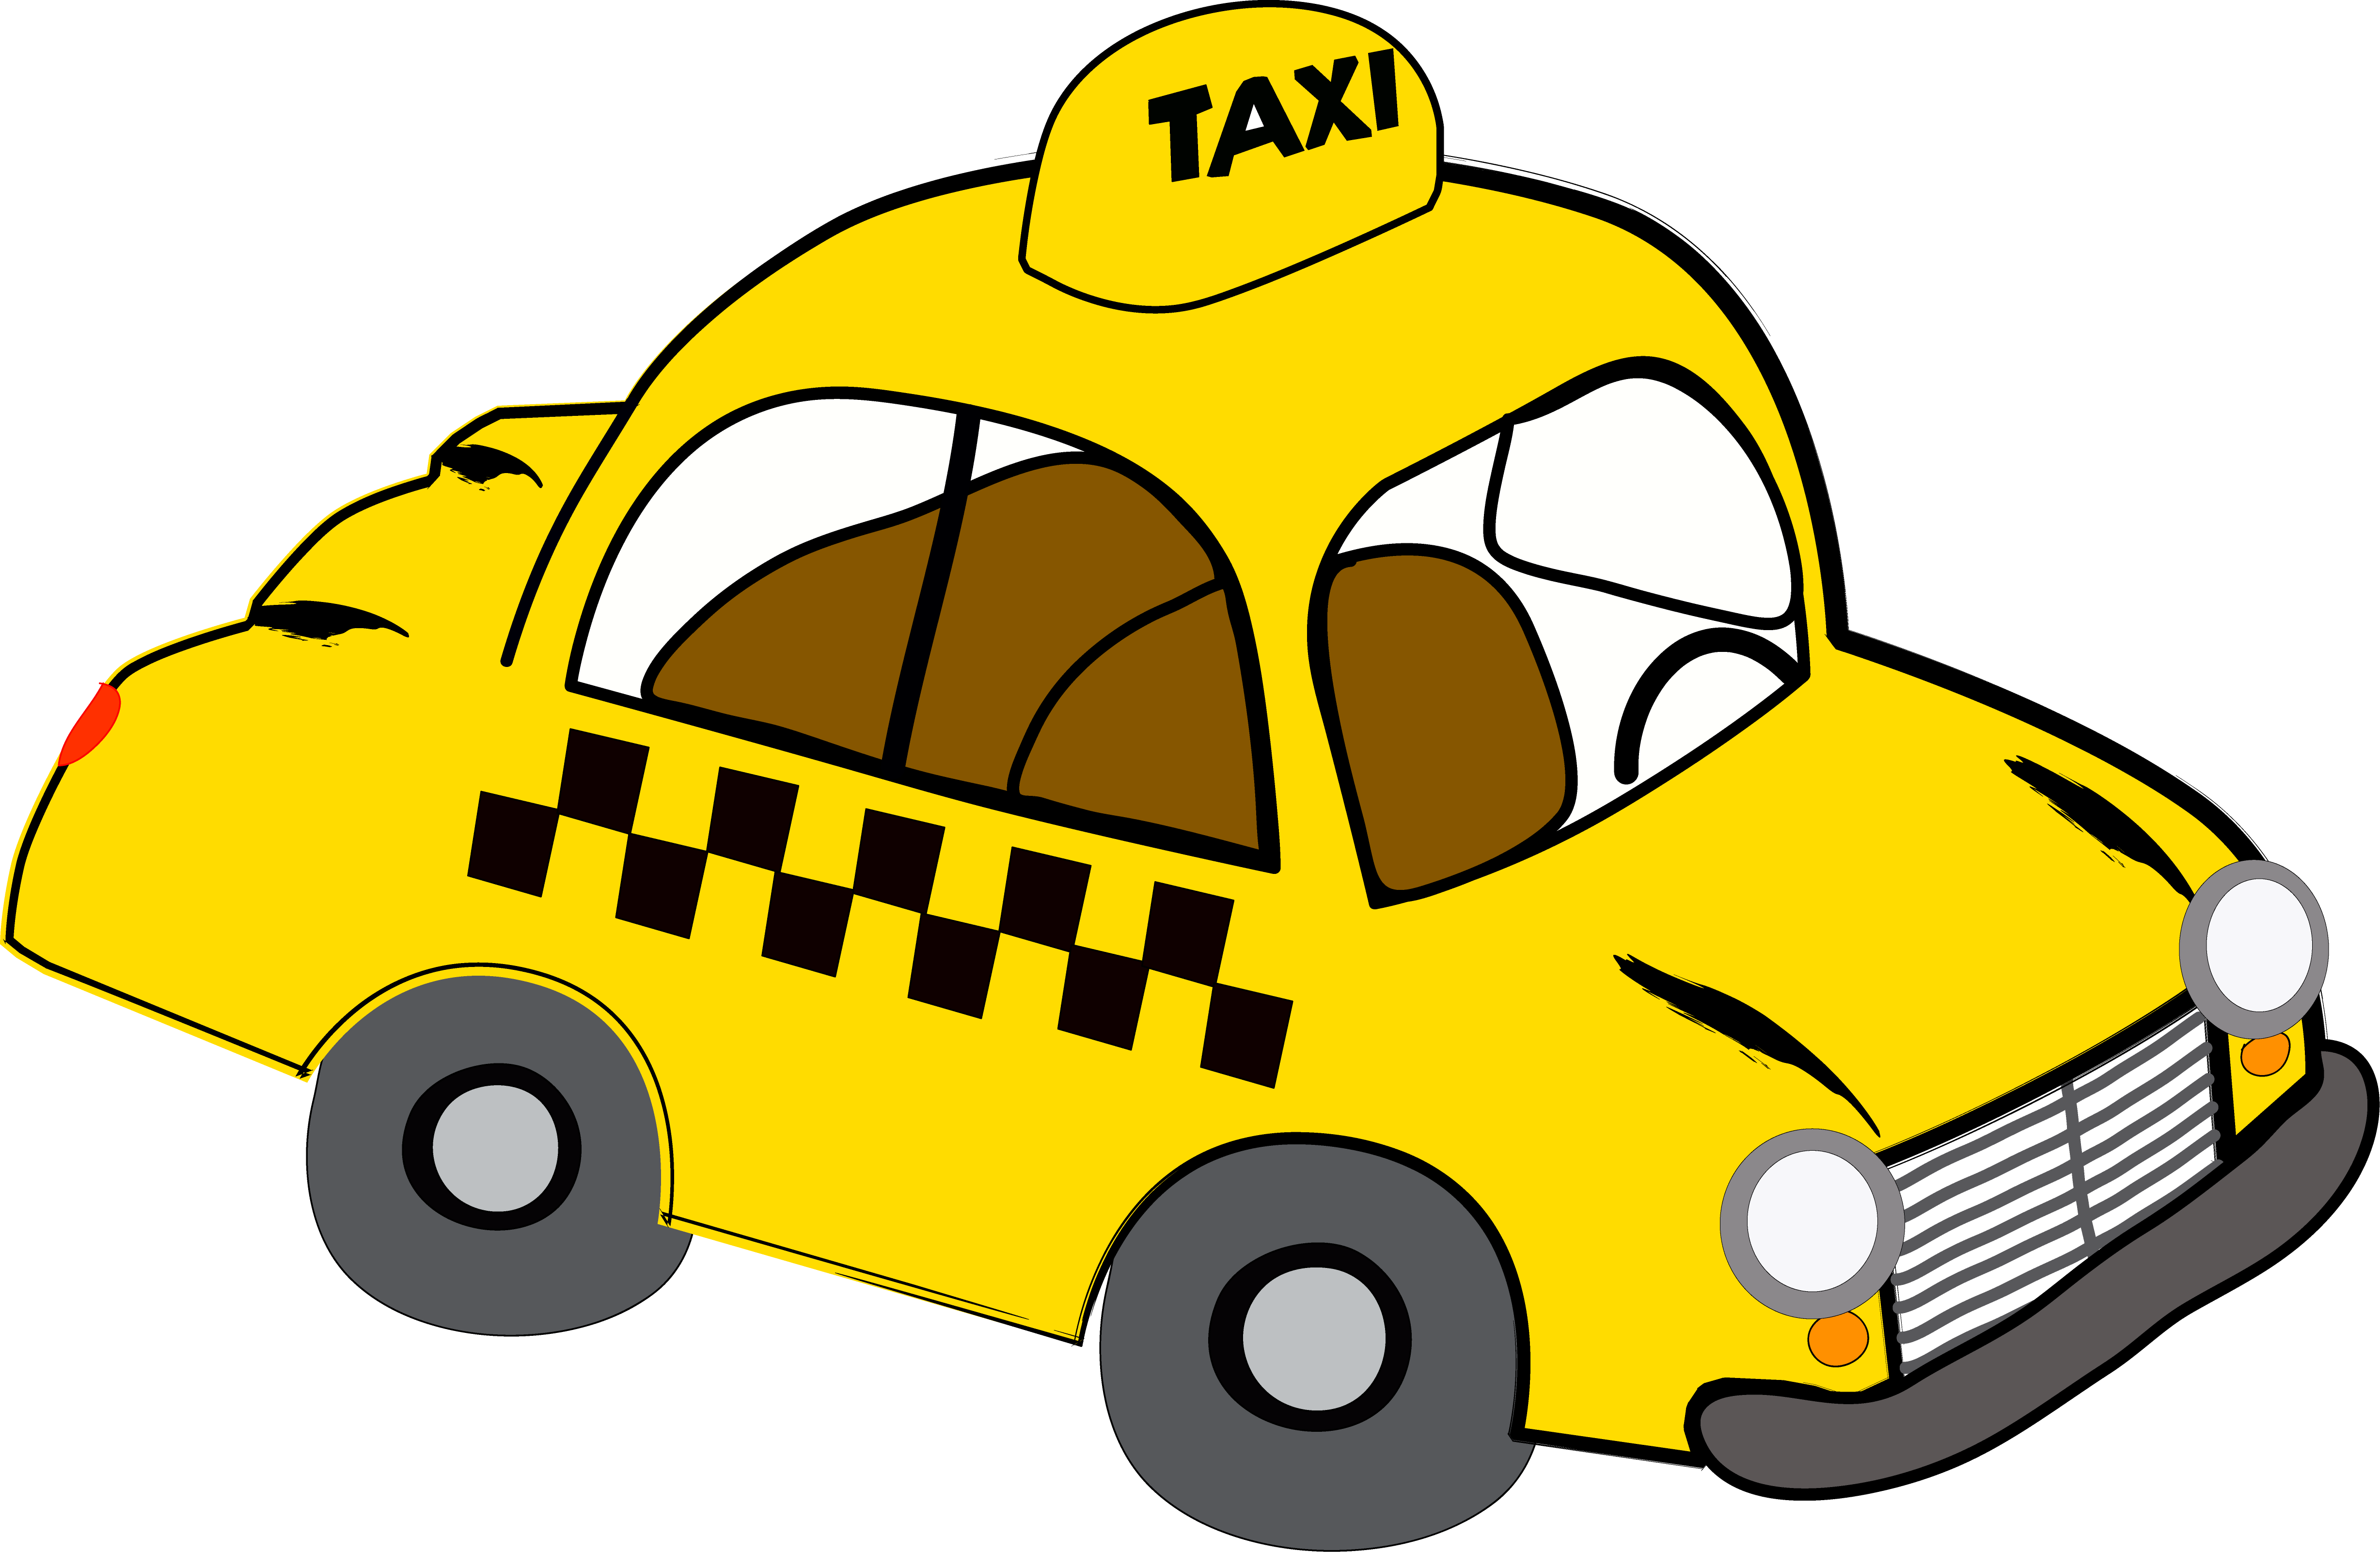 yellow cab clipart - photo #13